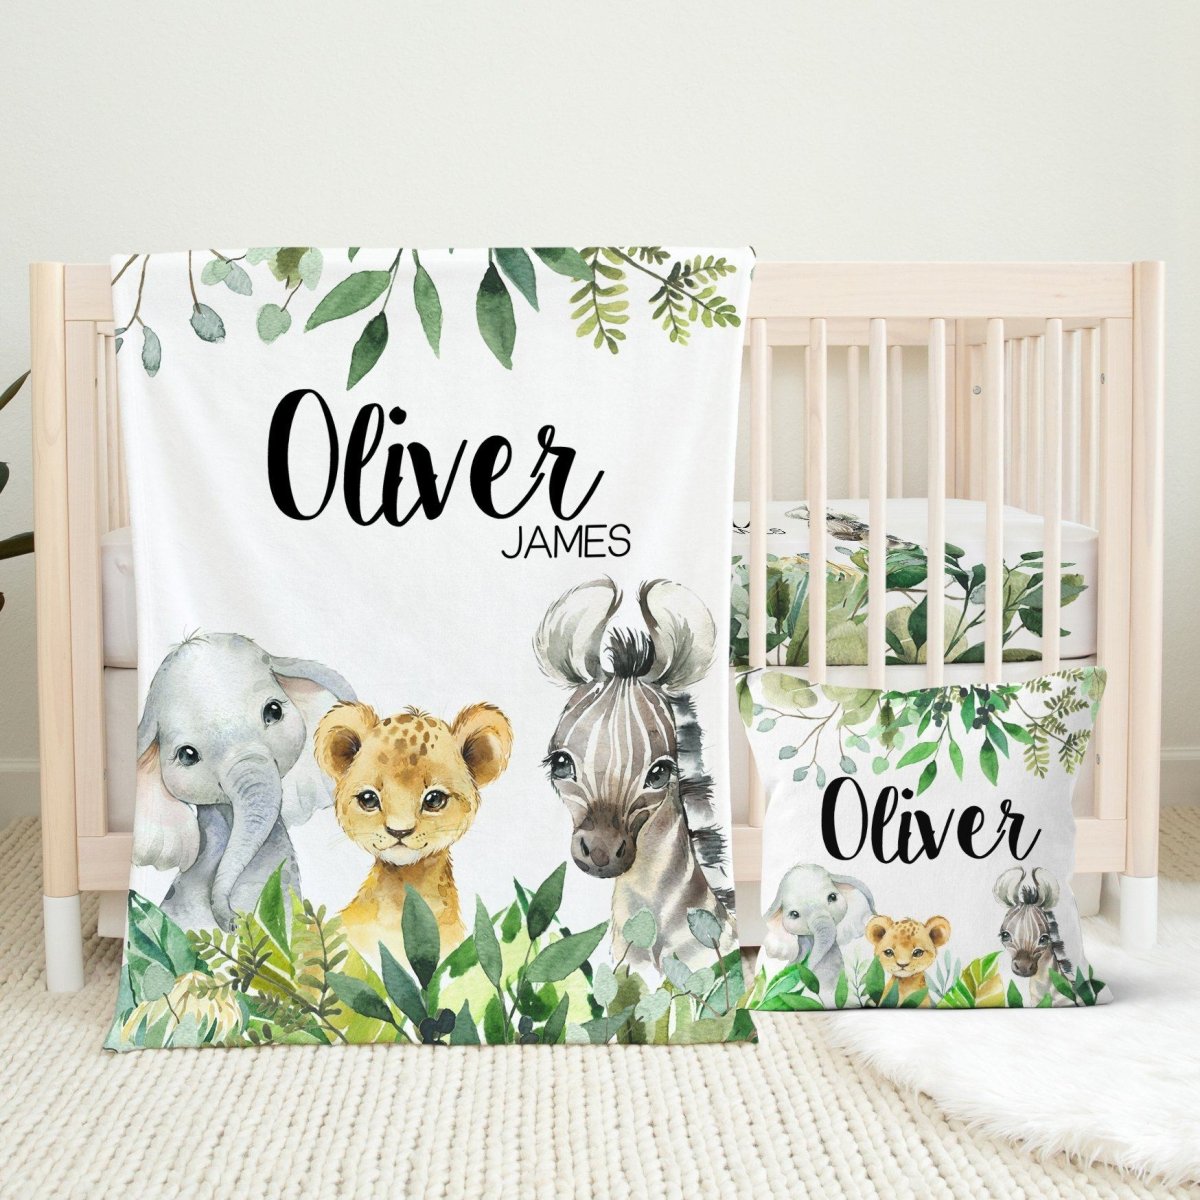 Leafy Jungle Personalized Crib Sheet - gender_boy, Personalized_Yes, text